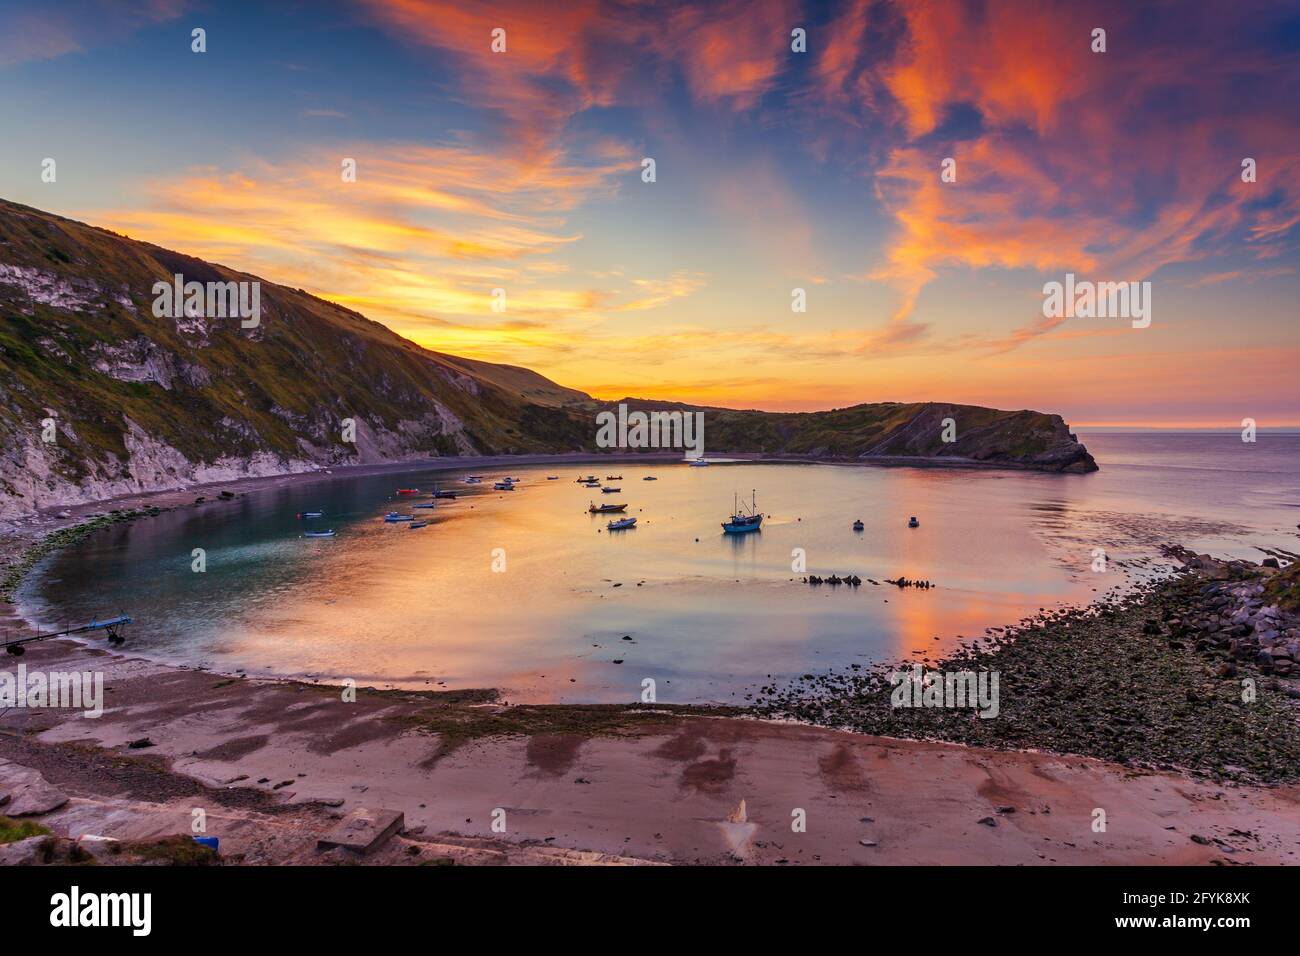 A glorious sunrise at the wonderful Lulworth Cove in Dorset. Stock Photo